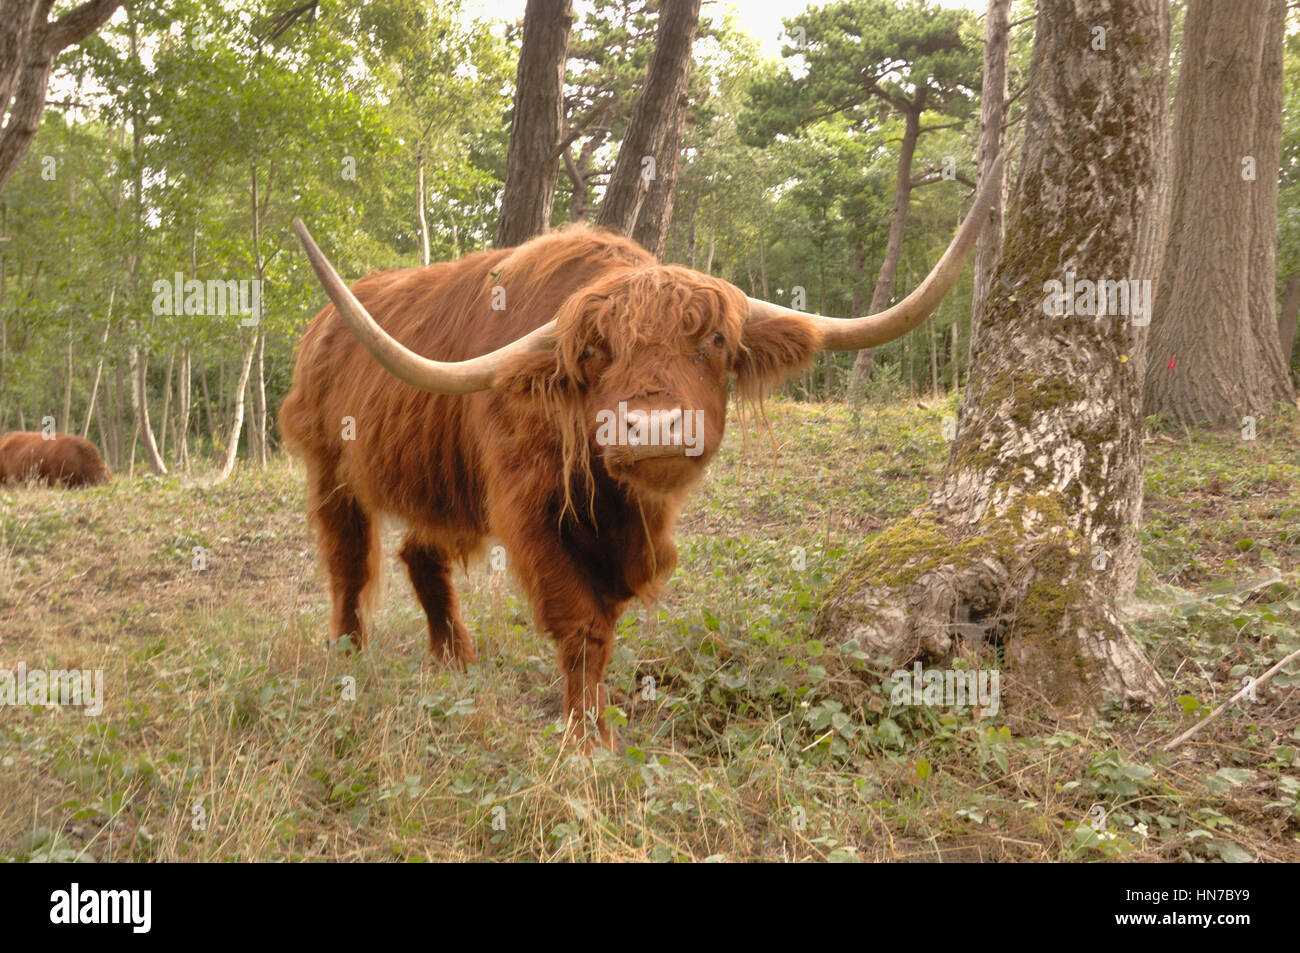 HIghland Cattle Bos taurus Photographed in nature reserve, France Stock Photo